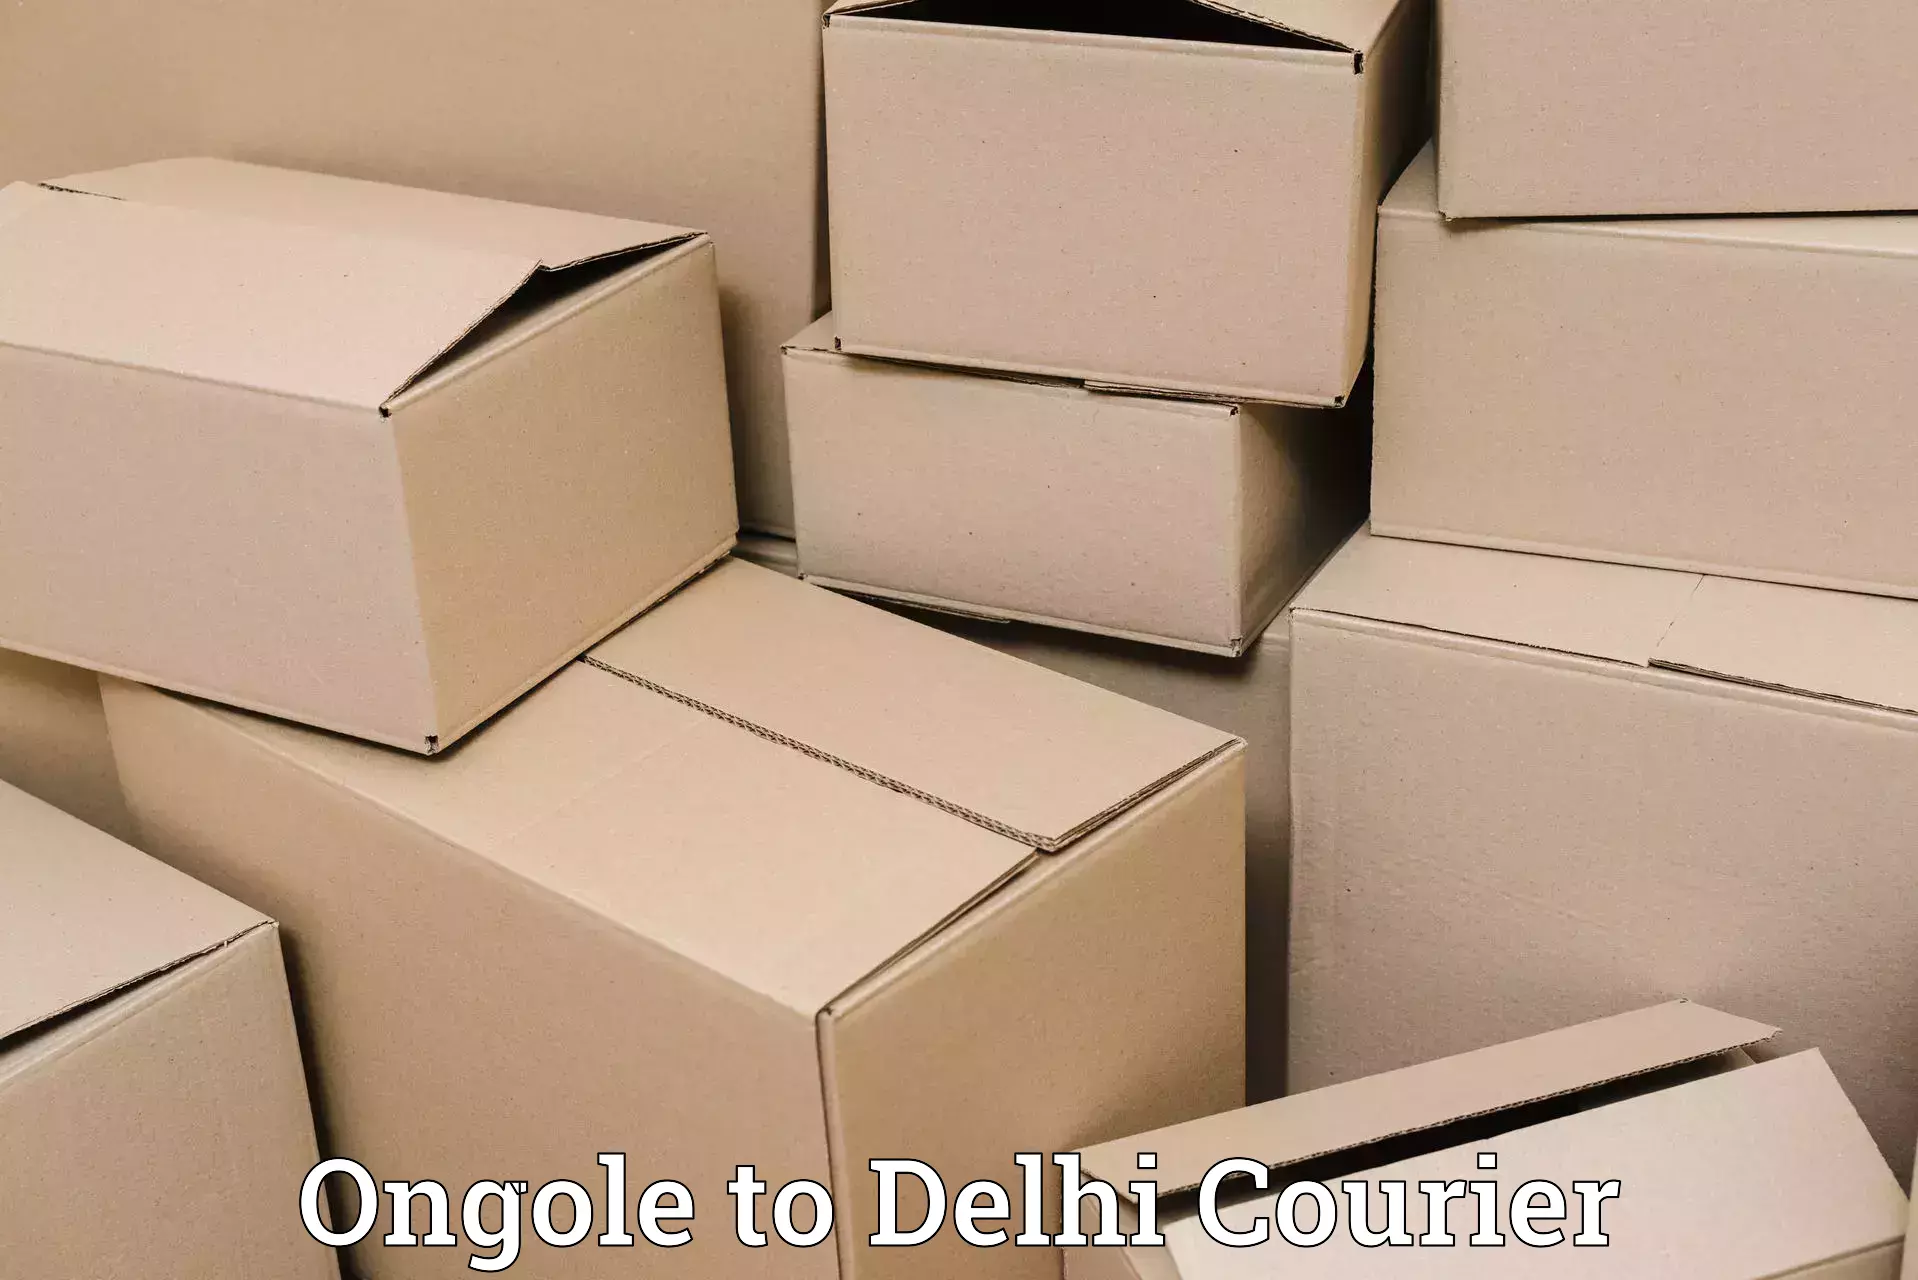 Expedited shipping methods Ongole to NCR